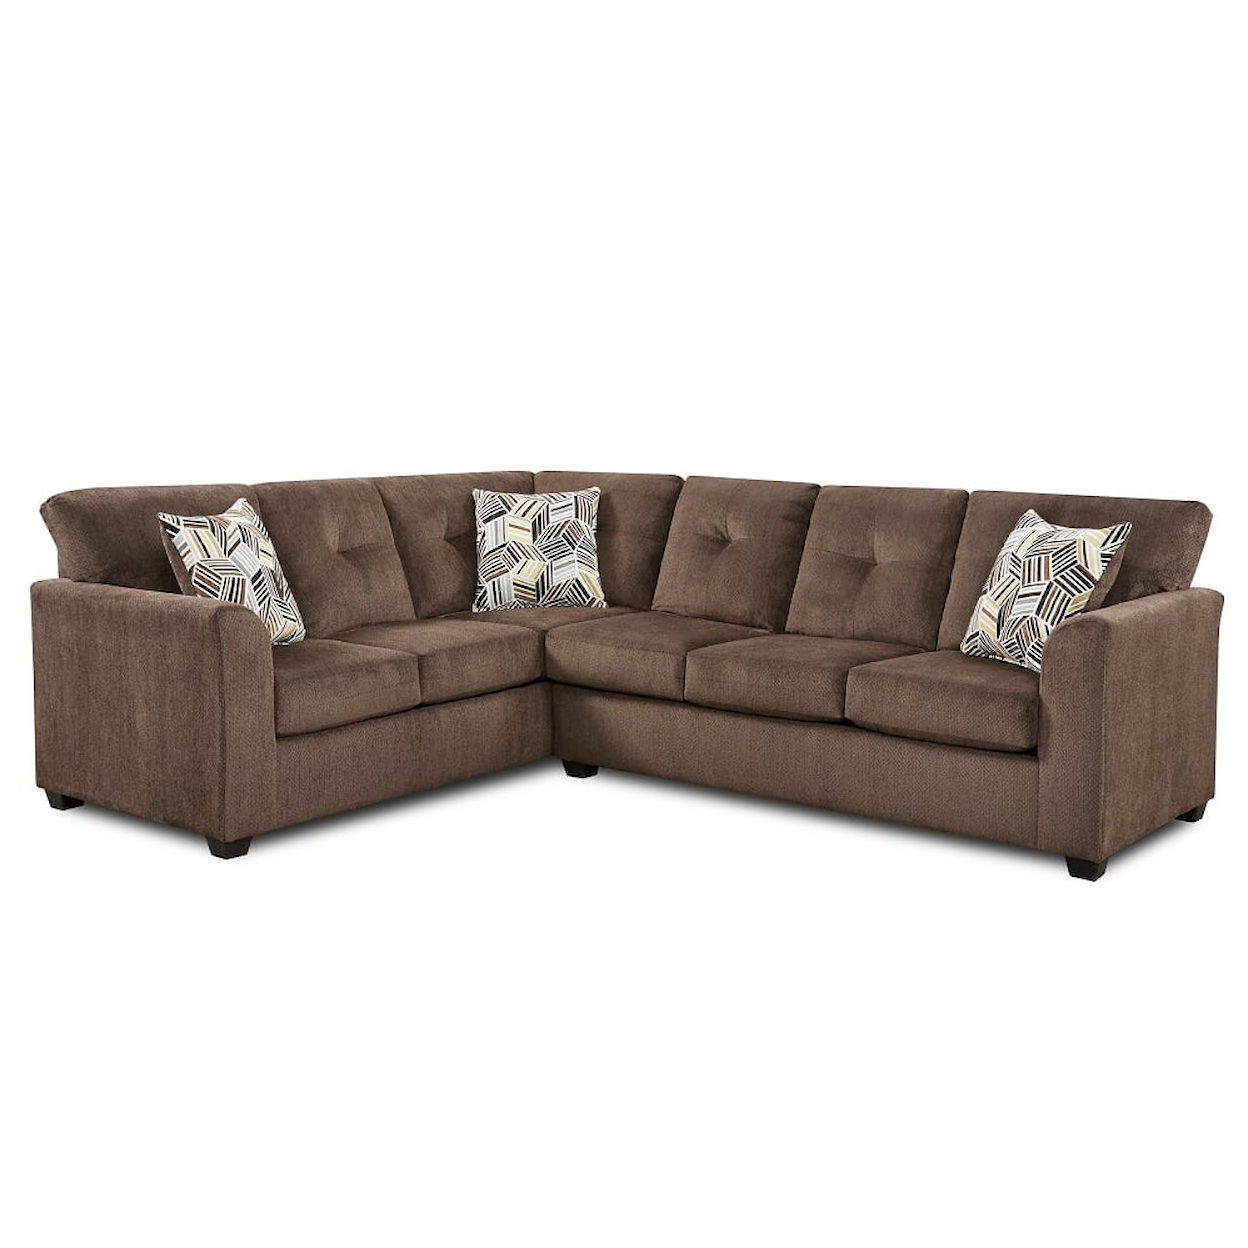 Washington Brothers Furniture Kendall KENDALL CHOCOLATE 2 PC SECTIONAL |